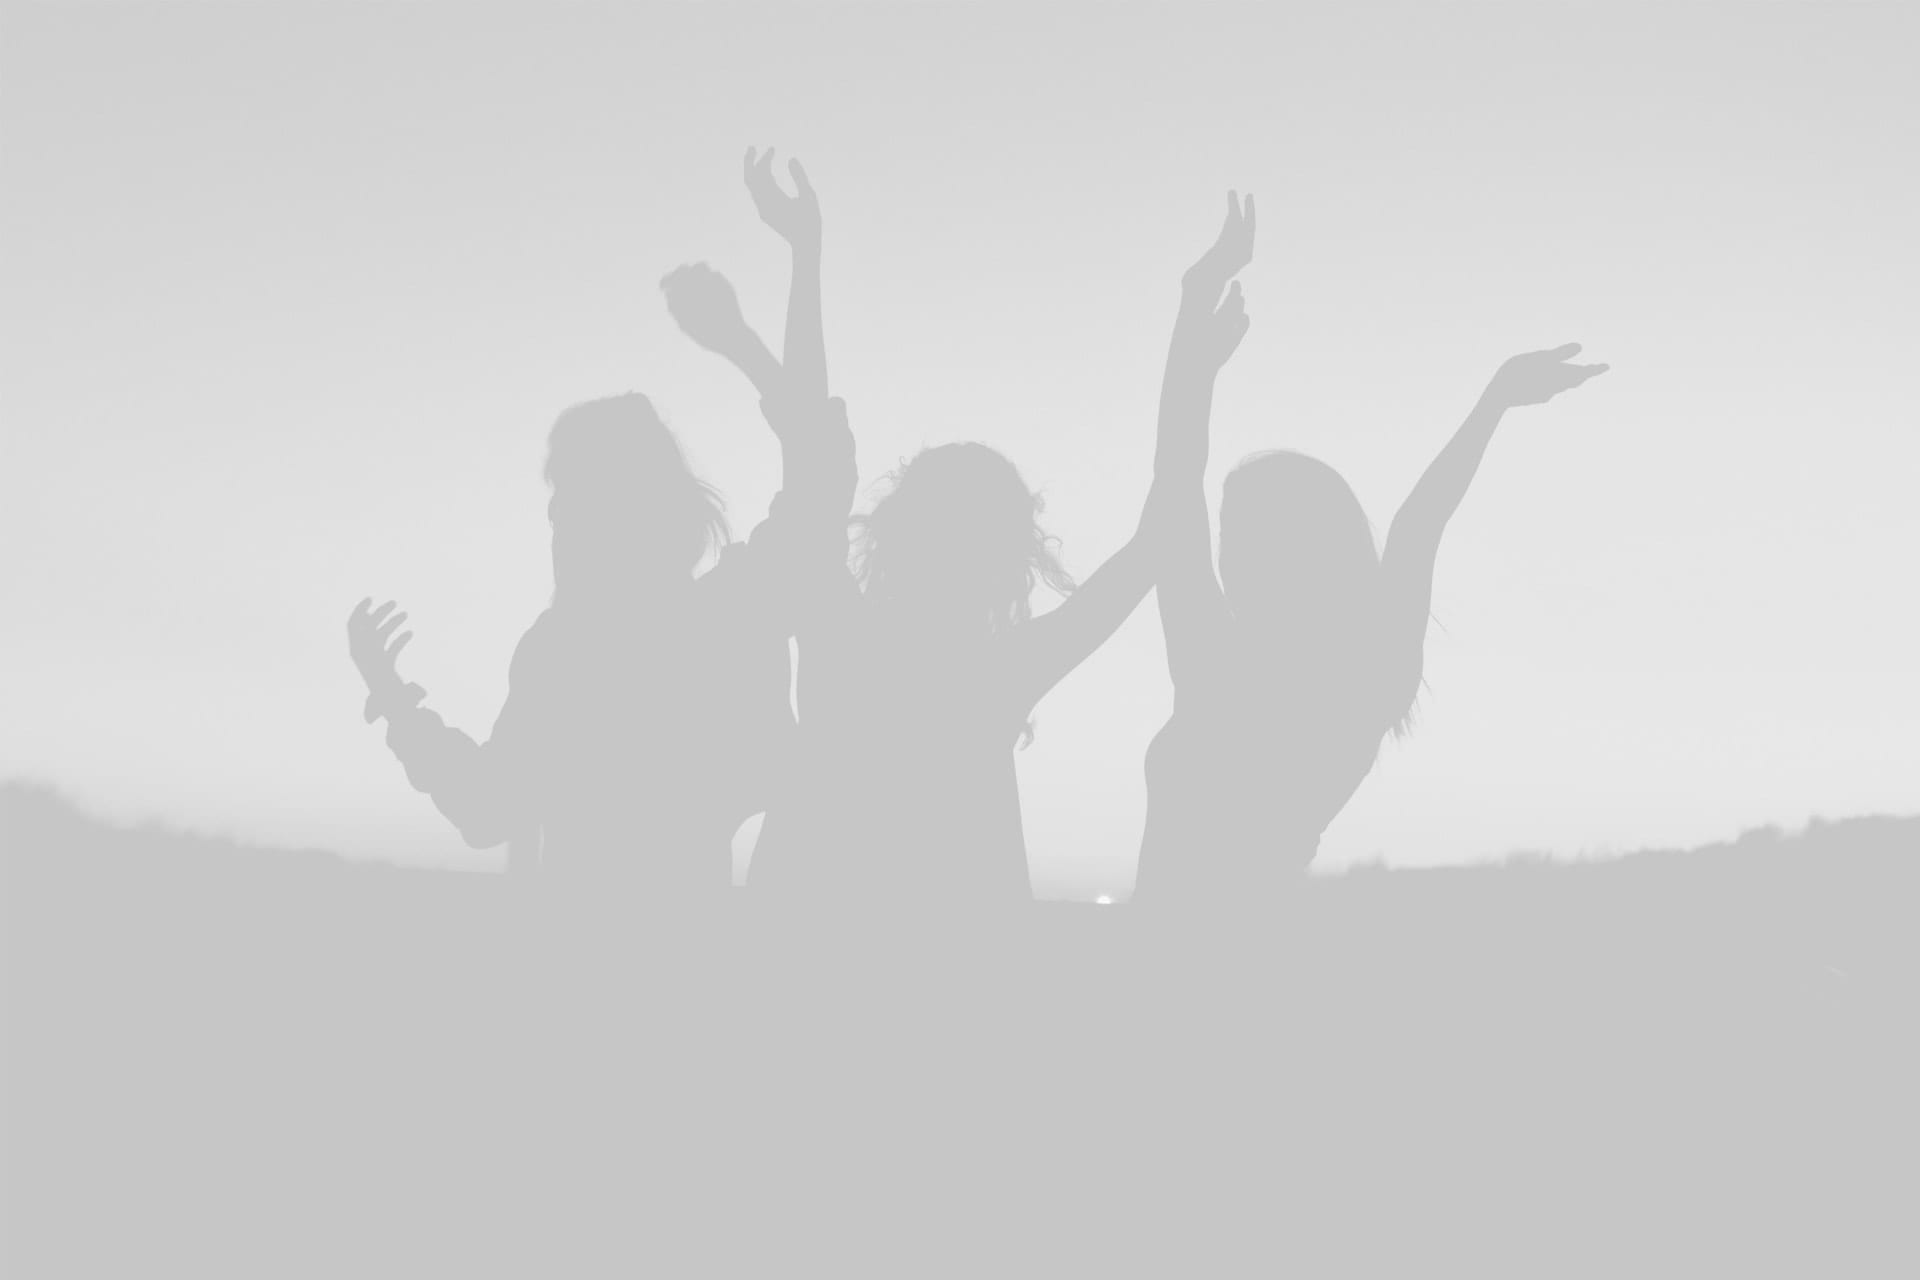 Silhouettes of three people with raised arms, joyfully posing against a bright, backlit background.